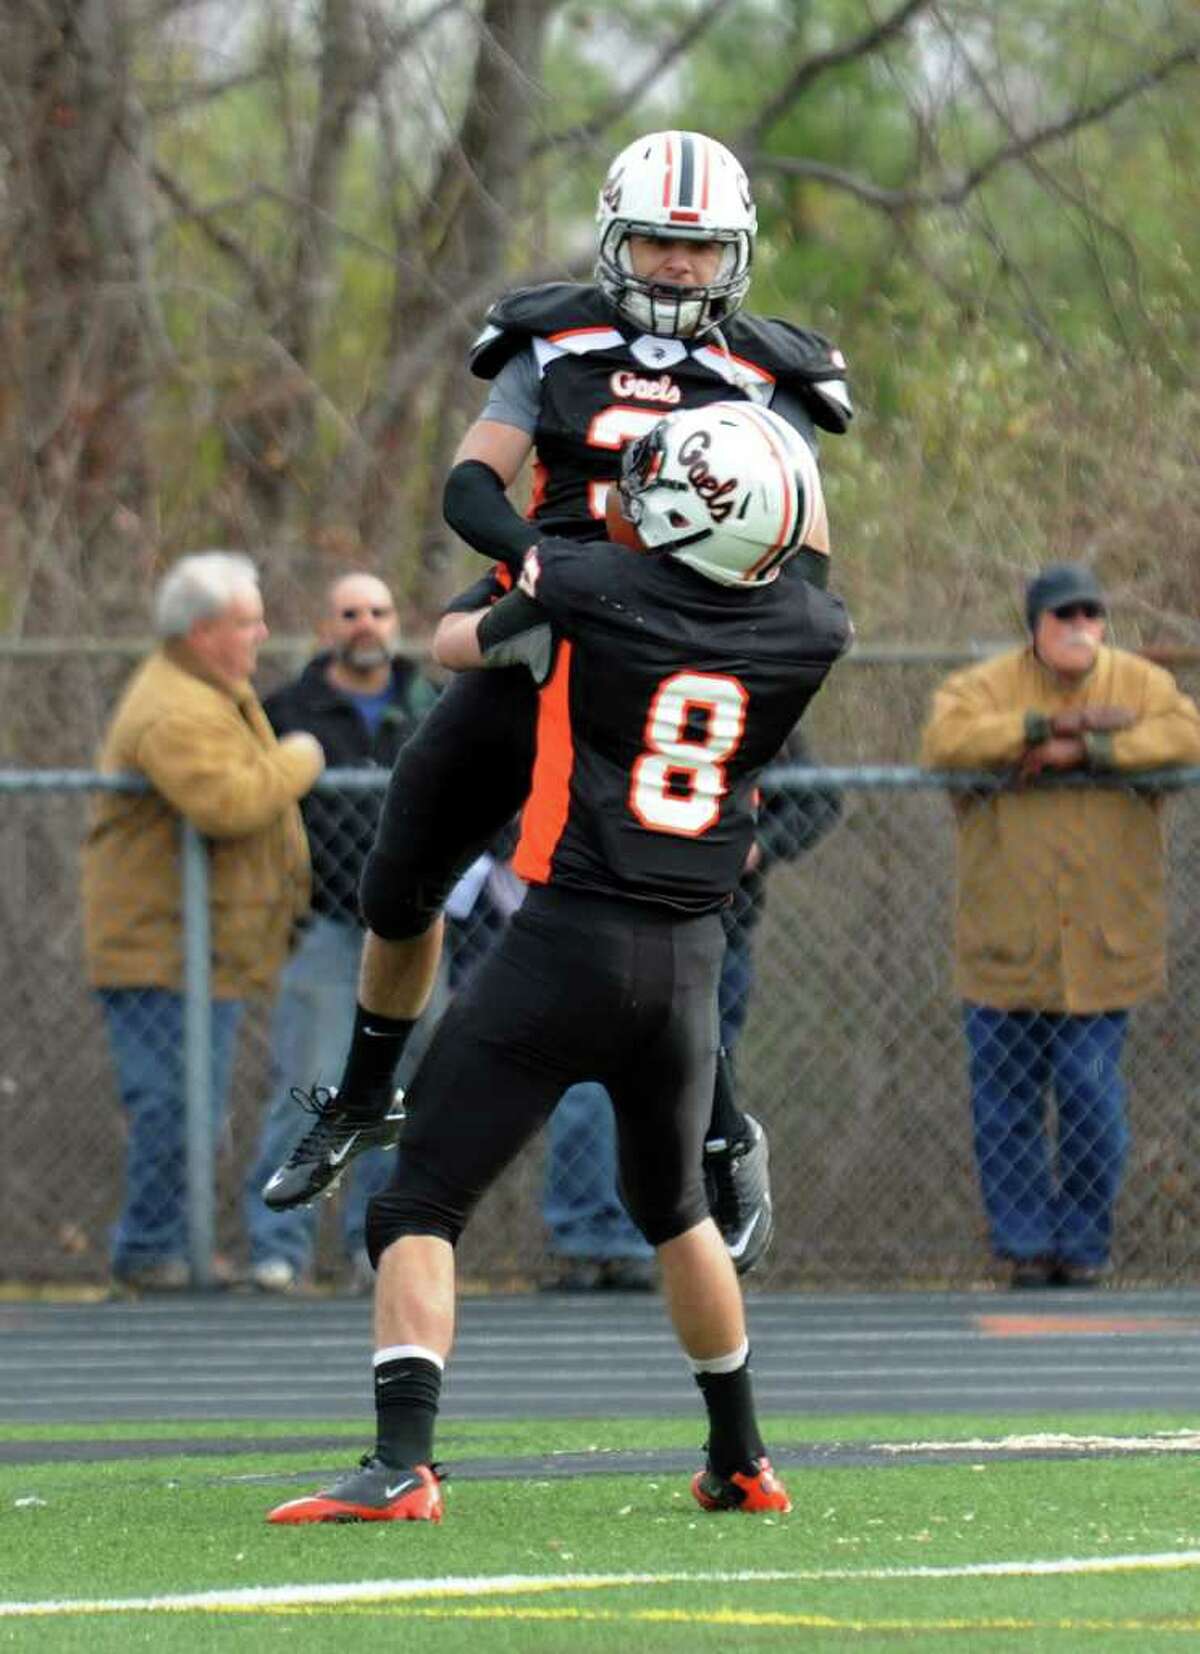 Shelton's #3 Ed Ostrowski leaps into the arms of teammate #8 Michael Georgalas after a touchdown by Ostrowski, during Thanksgiving Day Classic football action between Shelton and Derby in Shelton, Conn. on Thursday November 24, 2010.